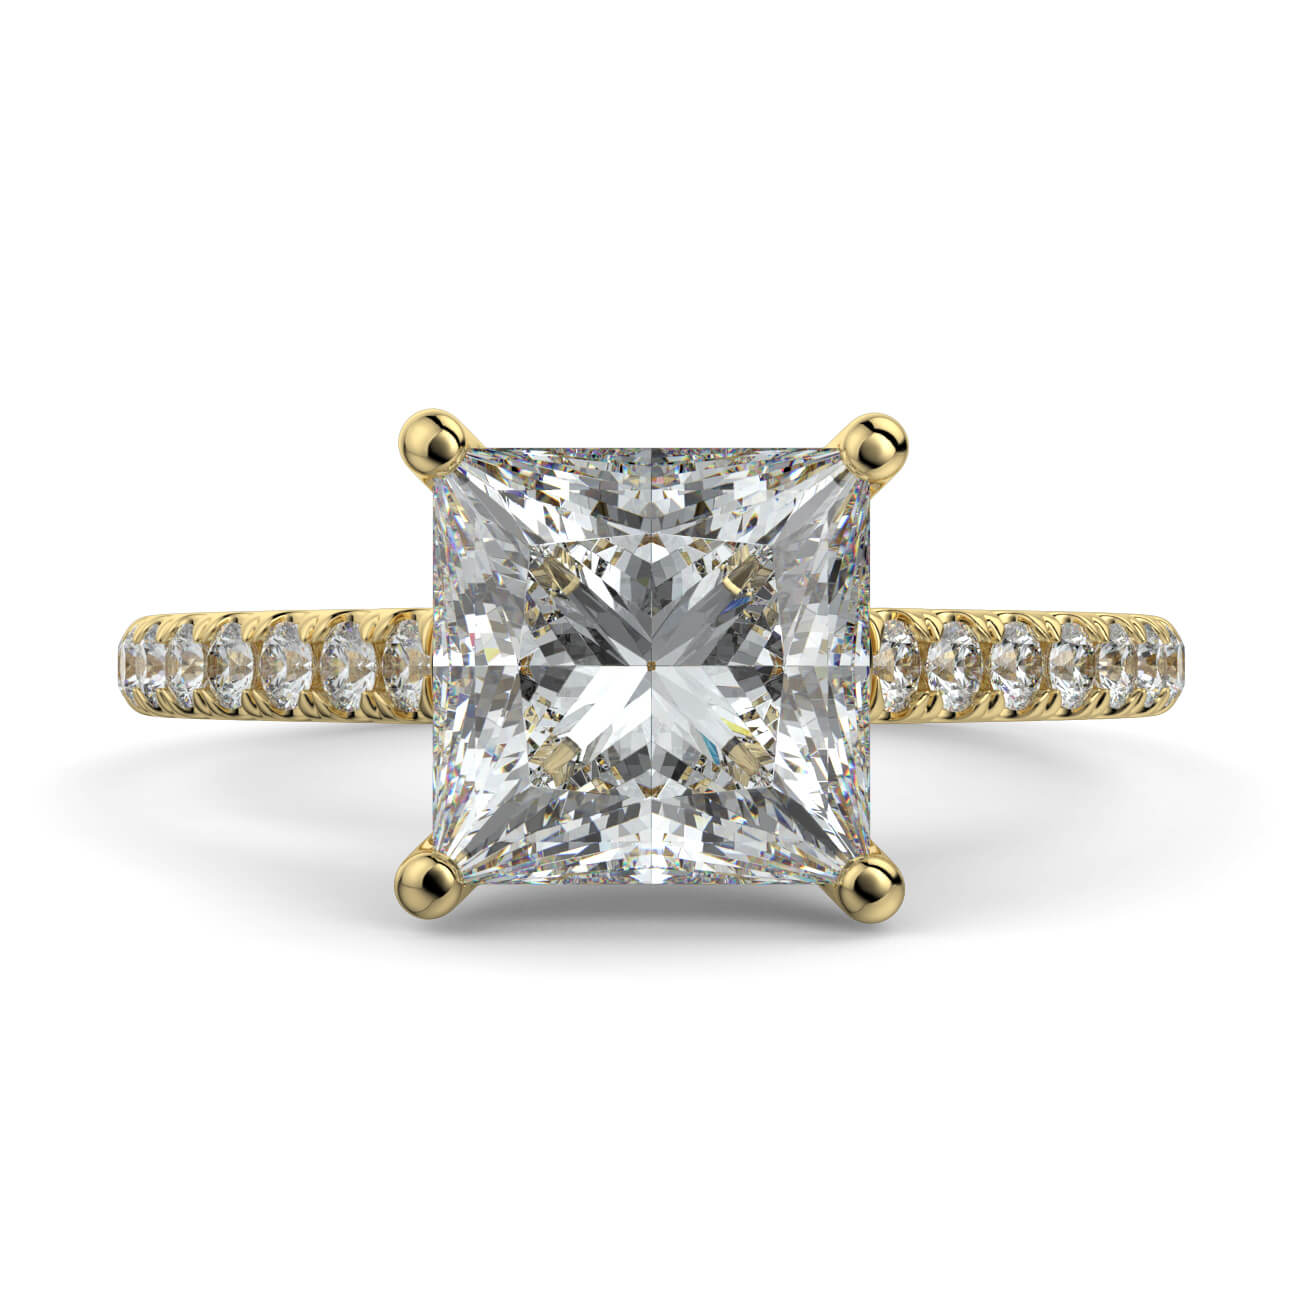 Princess Cut diamond cathedral engagement ring in yellow gold – Australian Diamond Network